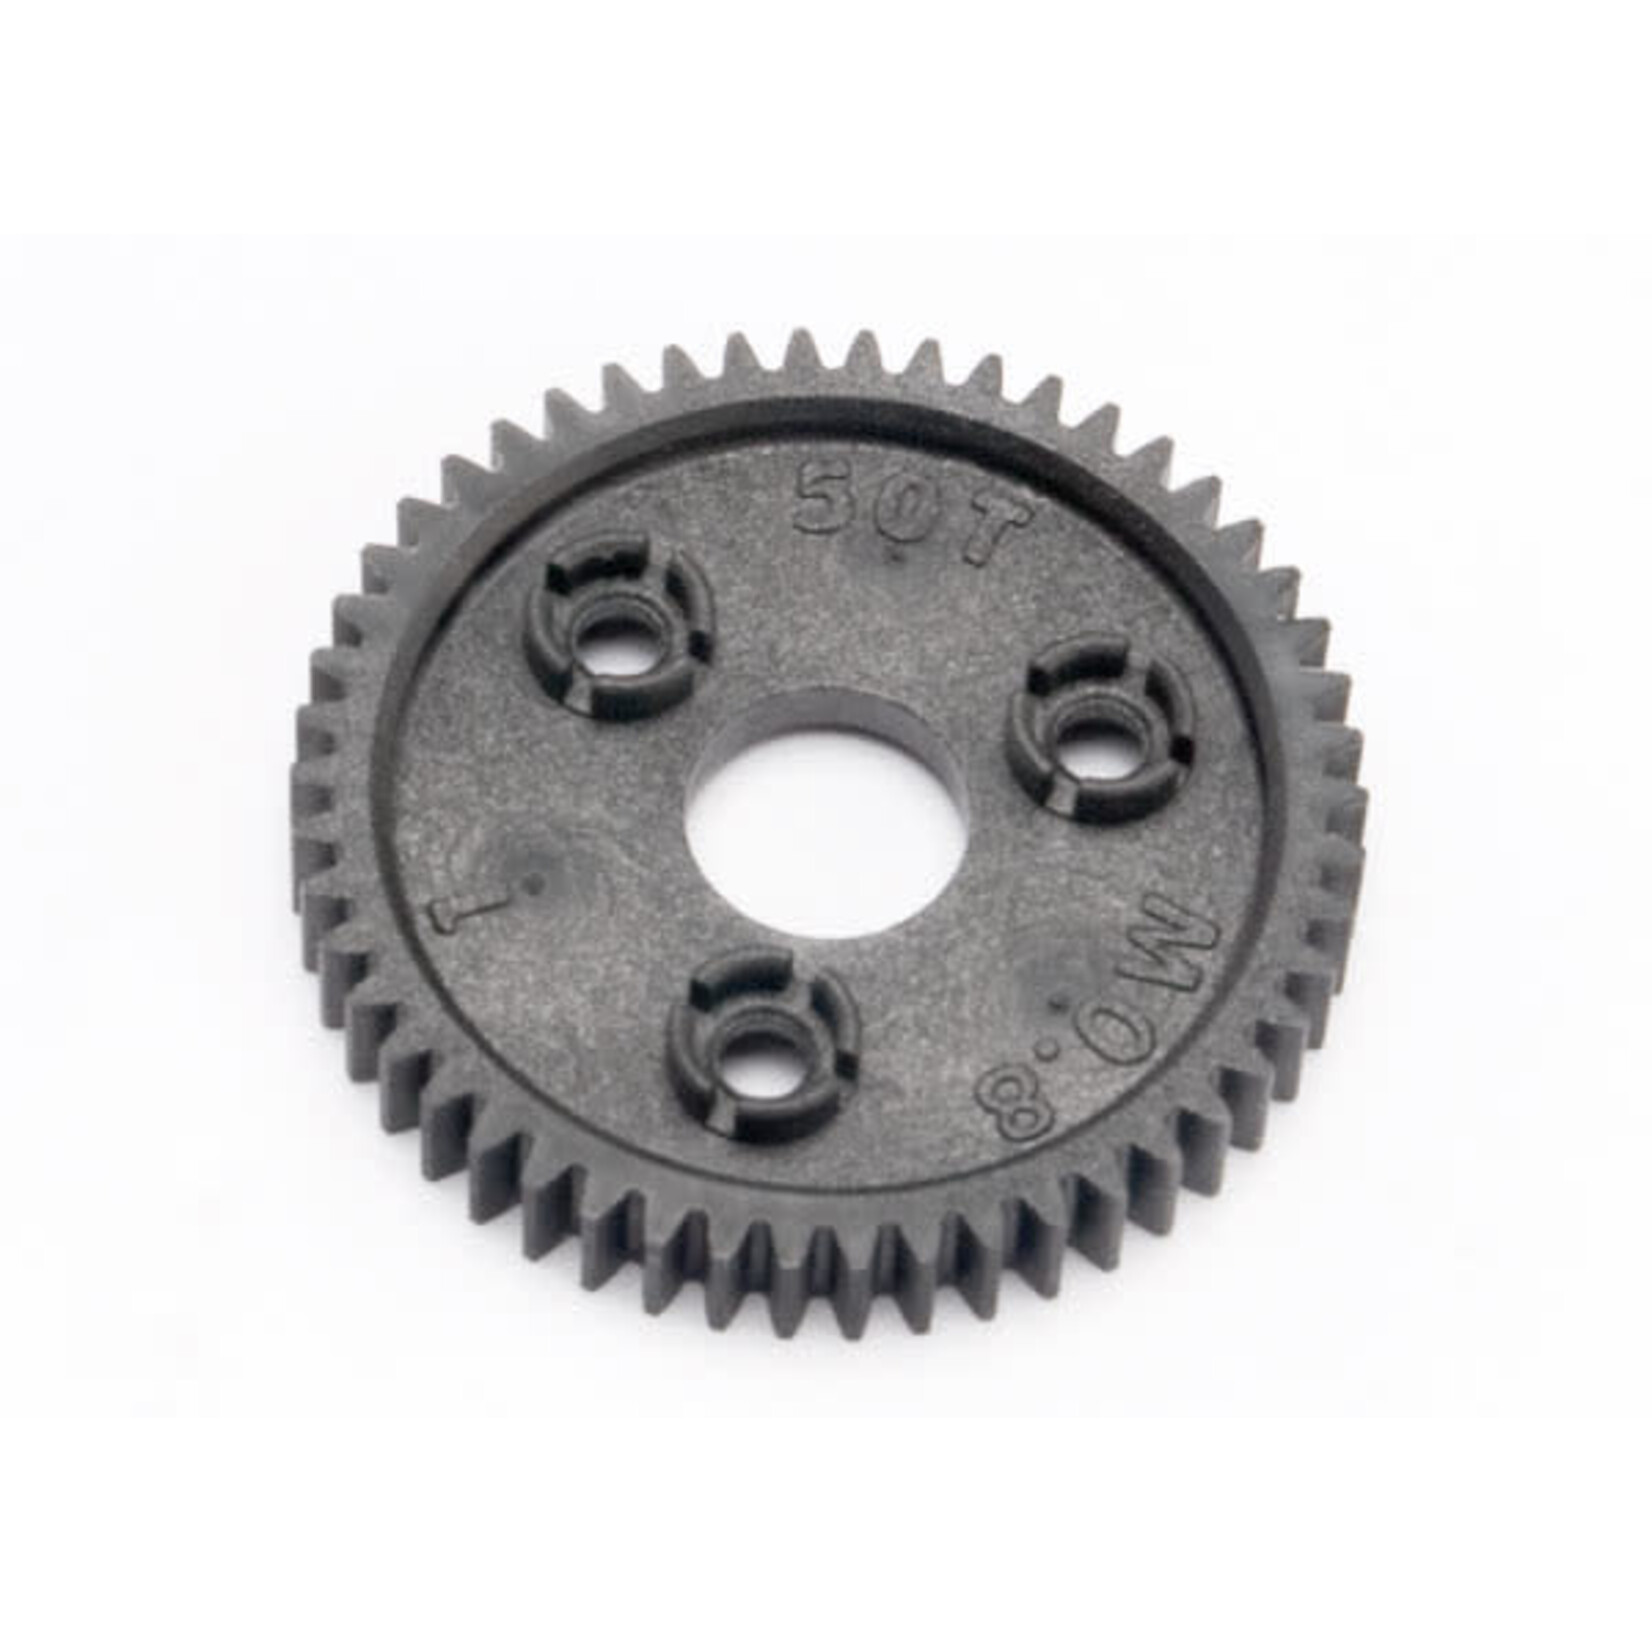 TRAXXAS Spur gear, 50-tooth (0.8 metric pitch, compatible with 32-pitch)